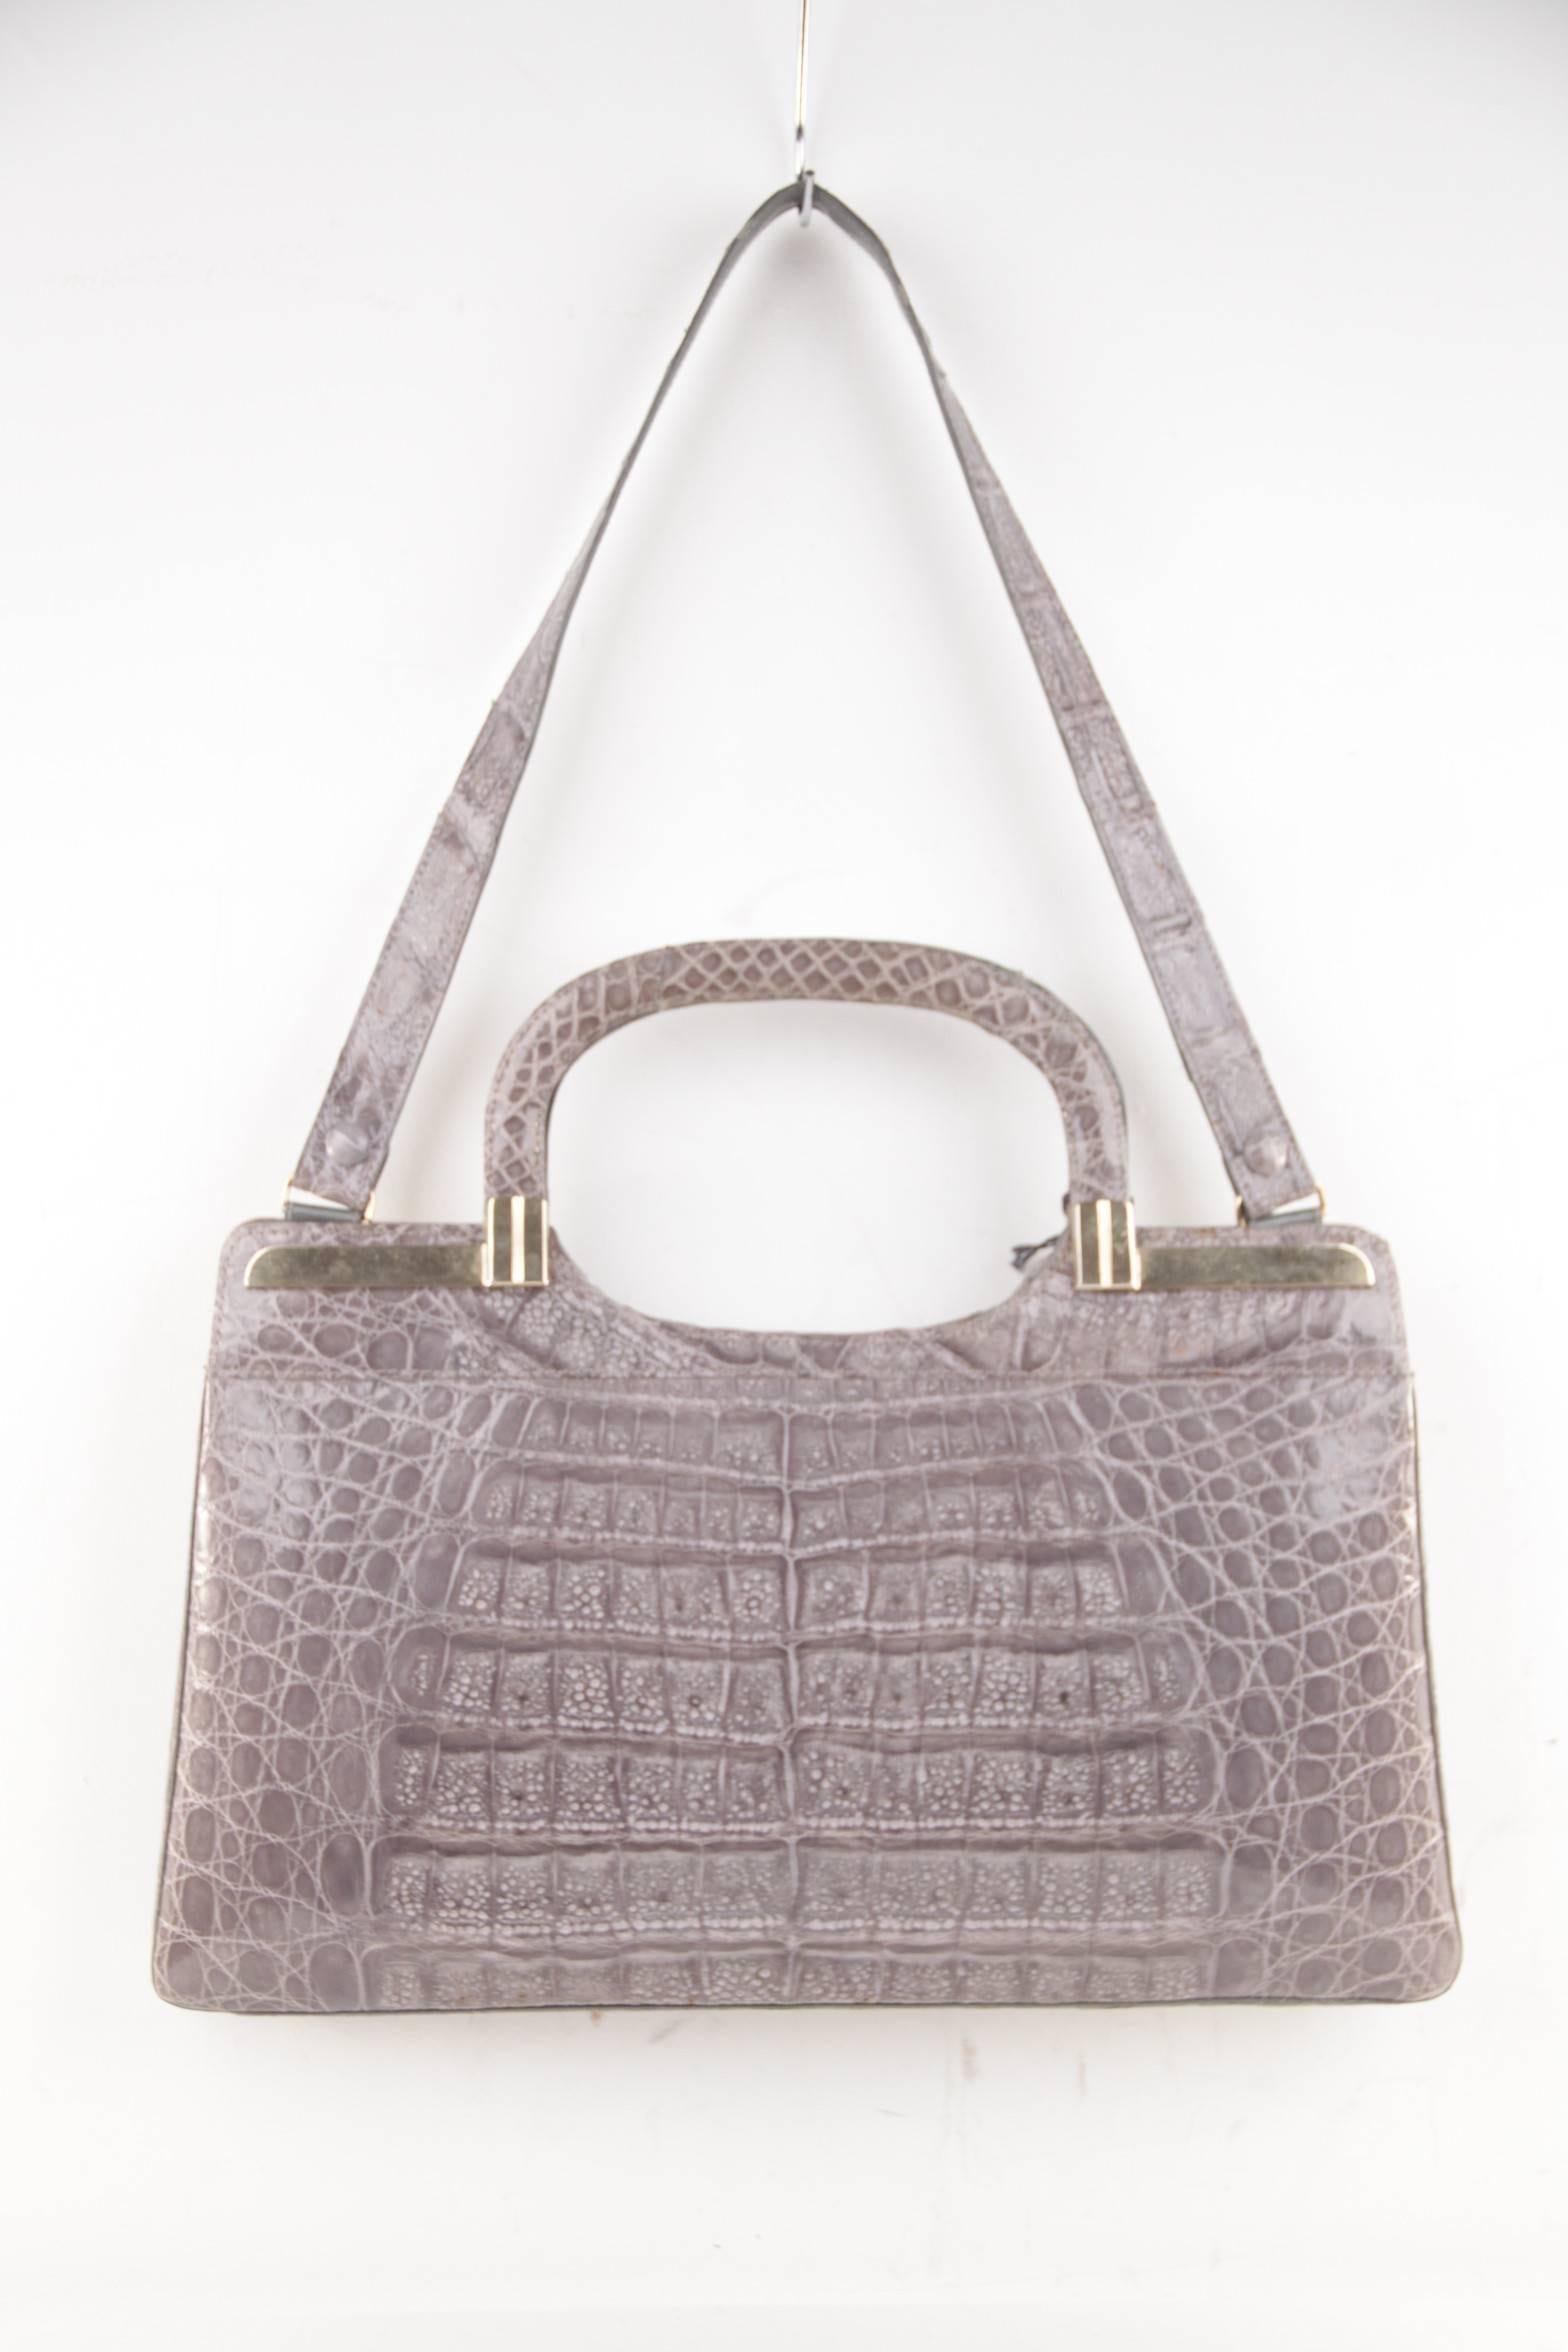 
- Gray Crocodile leather

- Gold metal hardware

- Top handles

- Double button closure on top

- Gray lining

- 1 side zip pocket & 1 side open pockets

- Approx. measurements: 8 1/2 x 14 1/2 x 1 1/2 inches - 21,5 x 36,8 x